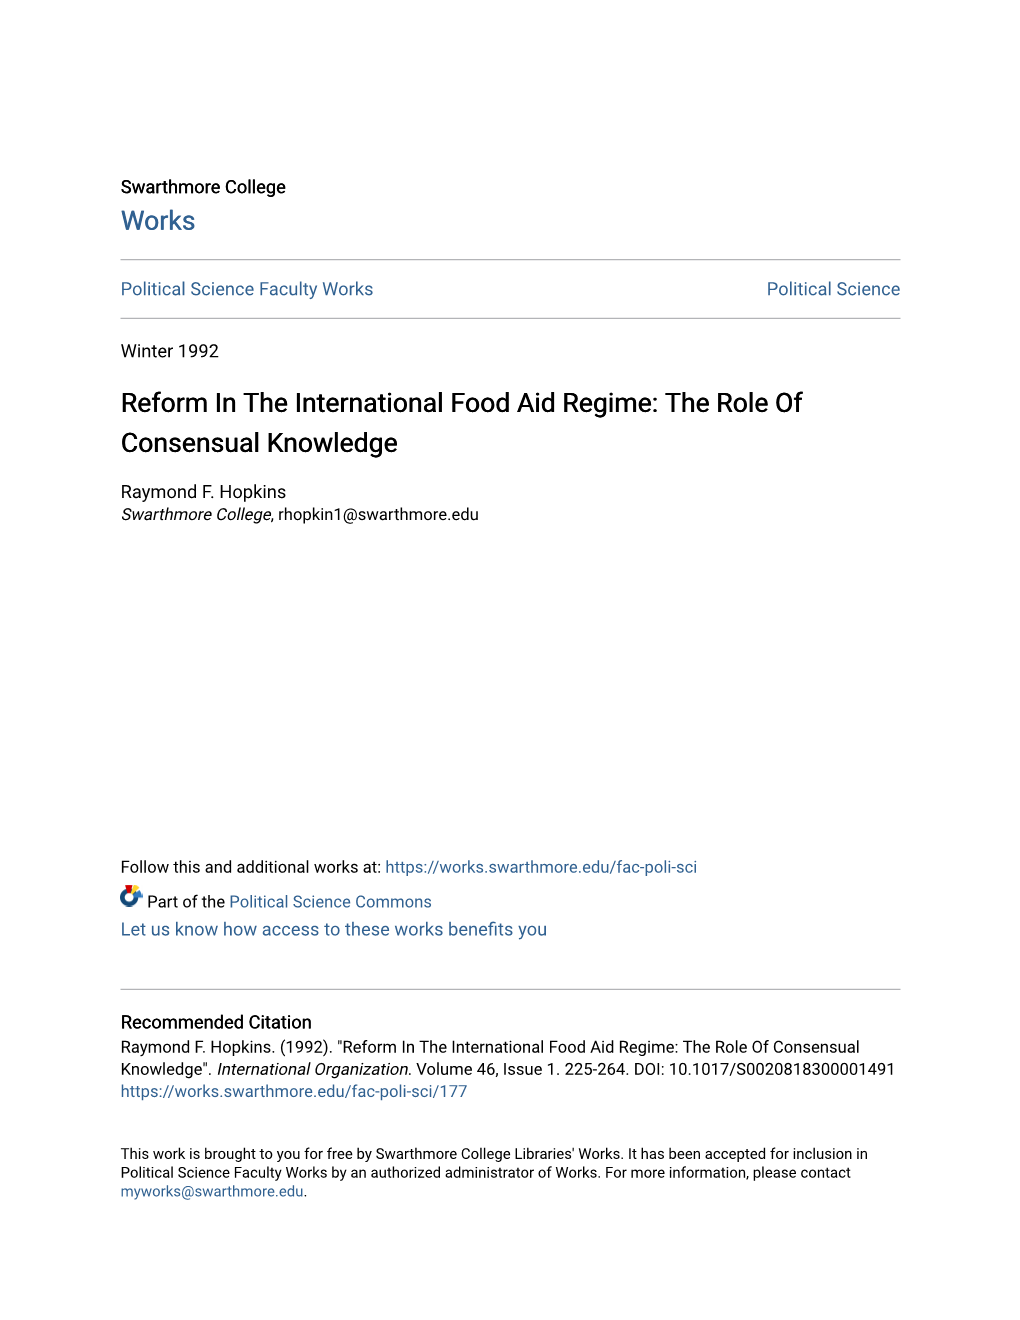 Reform in the International Food Aid Regime: the Role of Consensual Knowledge